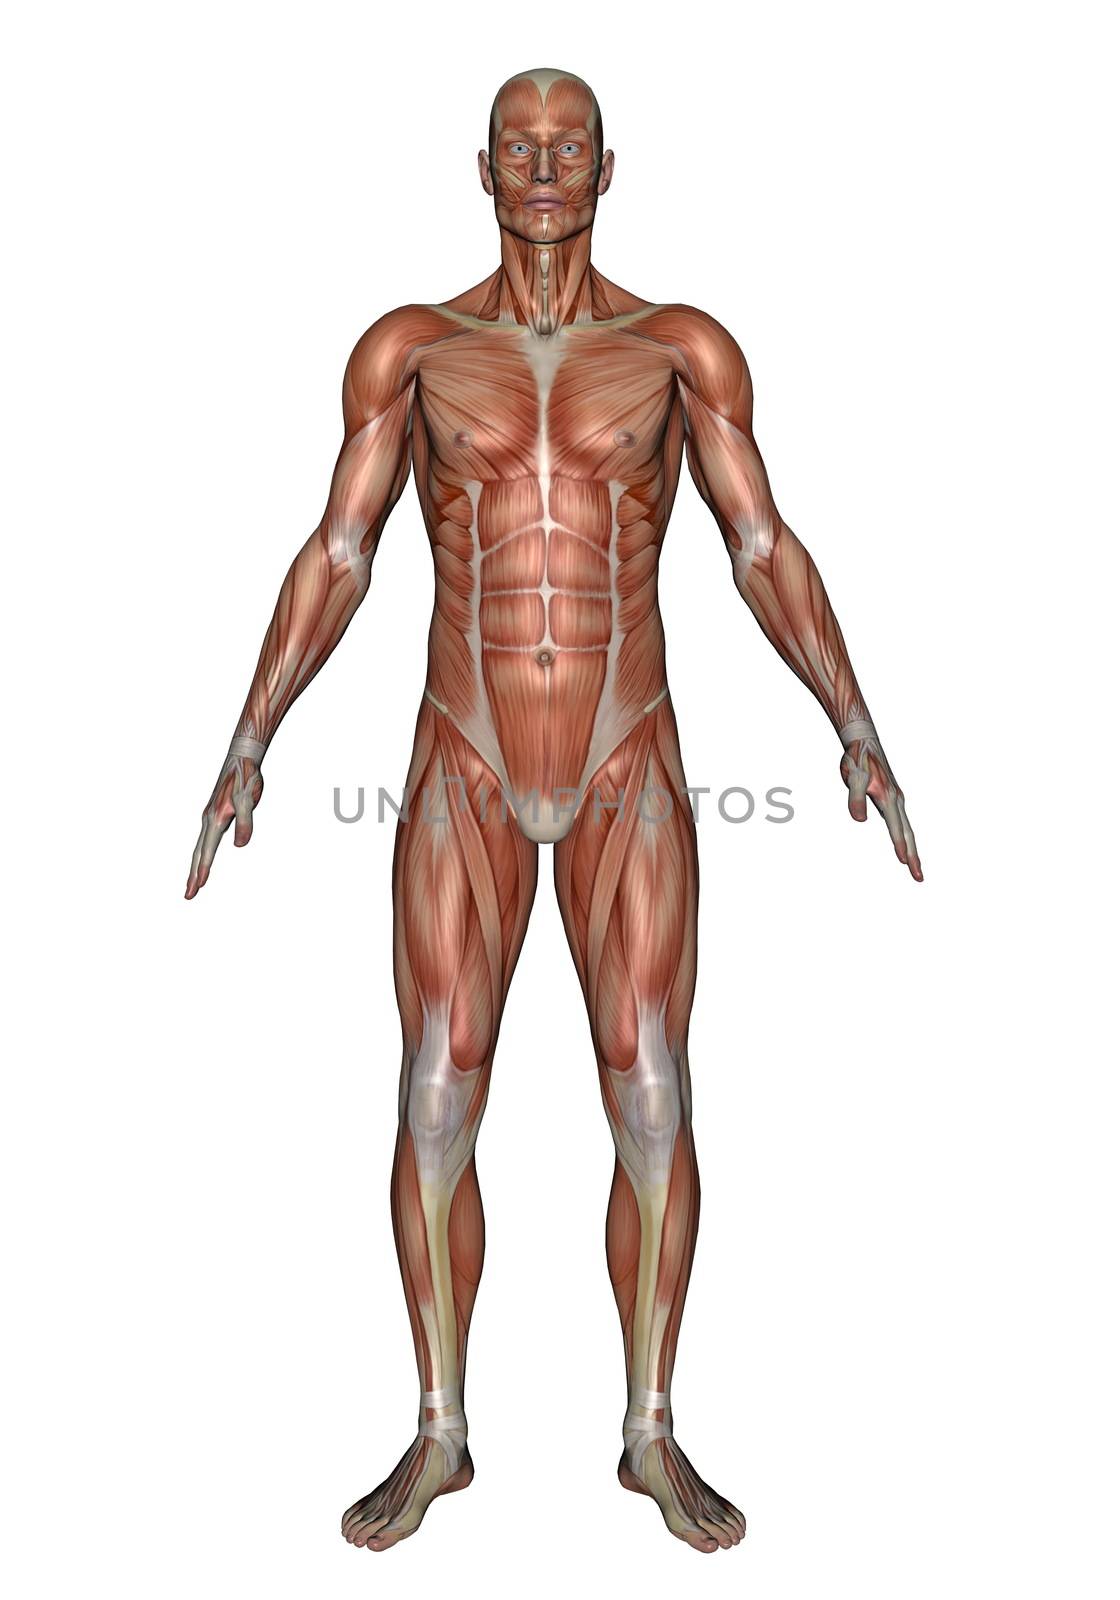 Realistic front muscles of man isolated in white background